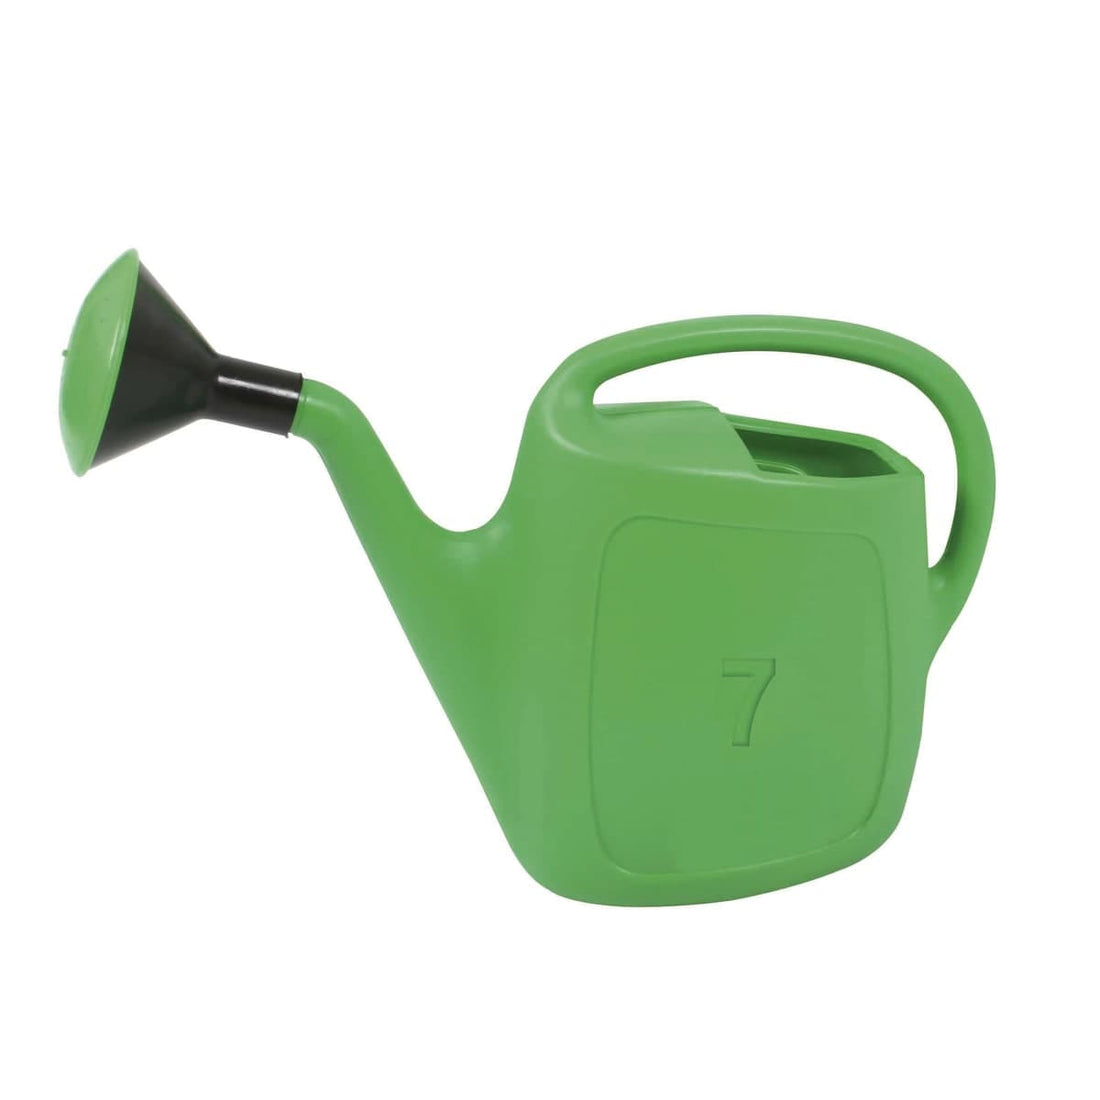 PLASTIC WATERING CAN 7 L - best price from Maltashopper.com BR500430017